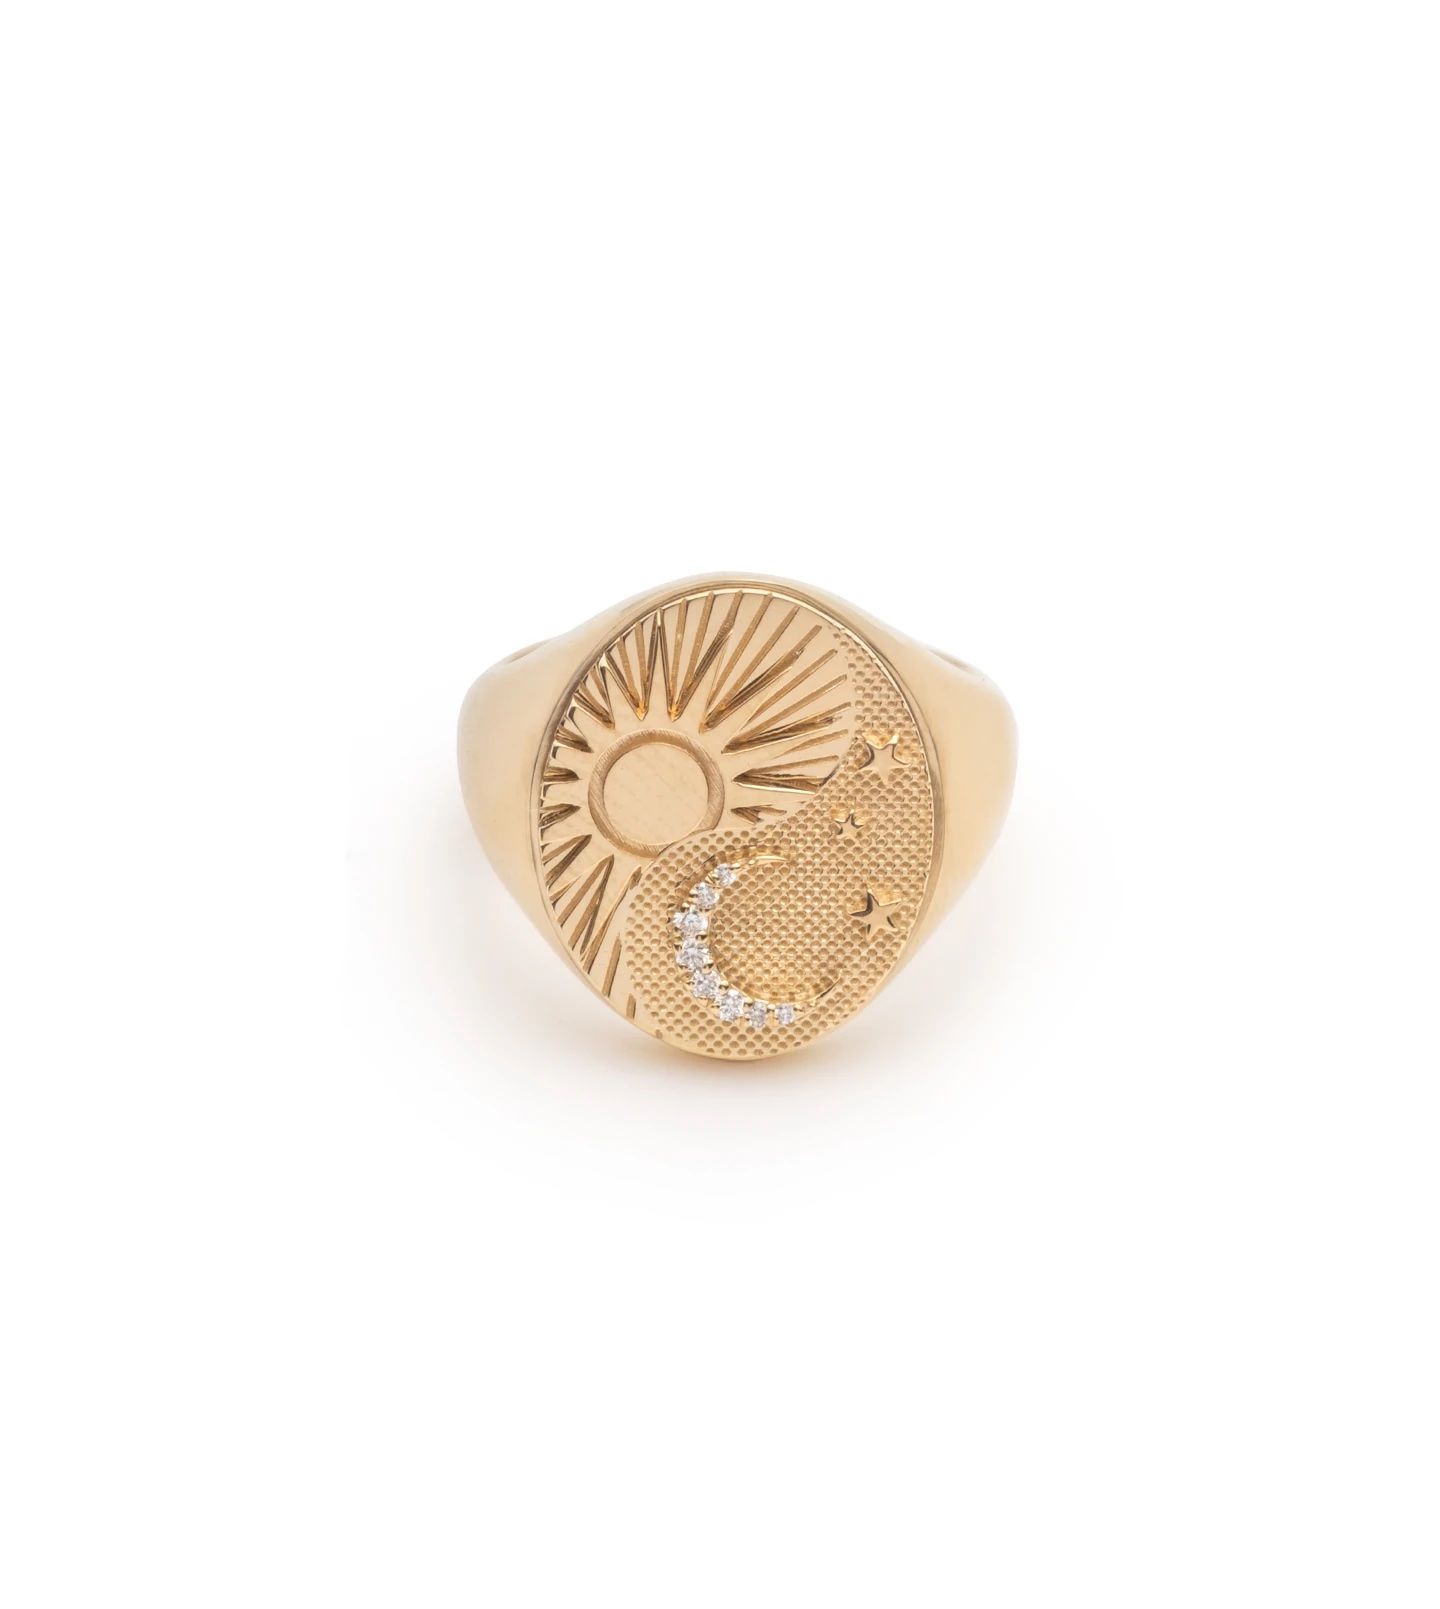 gold signet ring with astrological designs by Foundrae